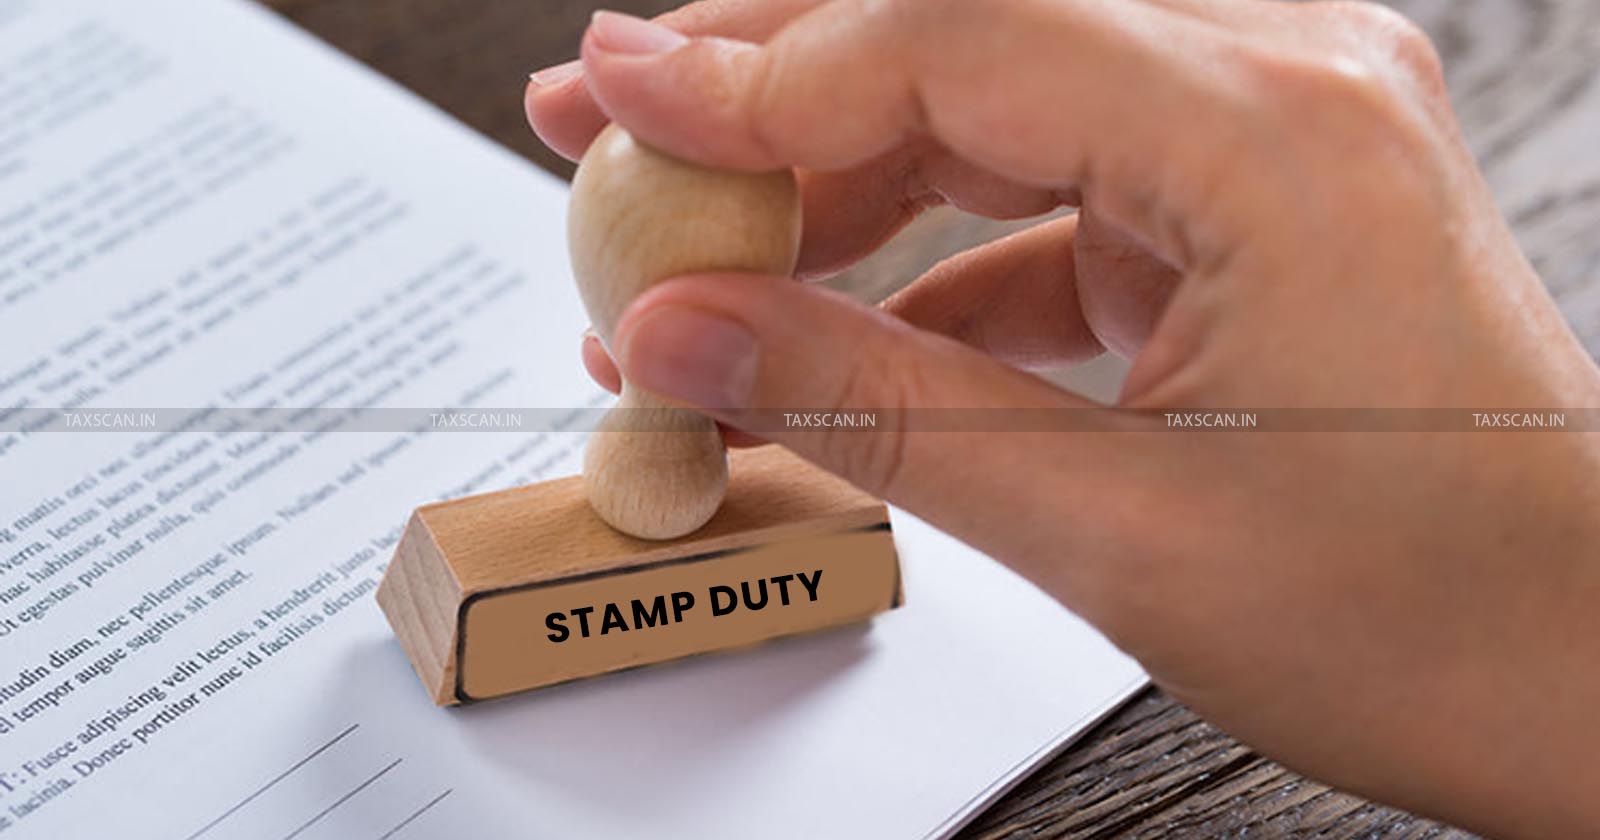 Instrument not Chargeable with Stamp Duty - Stamp Duty - Supreme Court - Duly Stamped - imposed - TAXSCAN